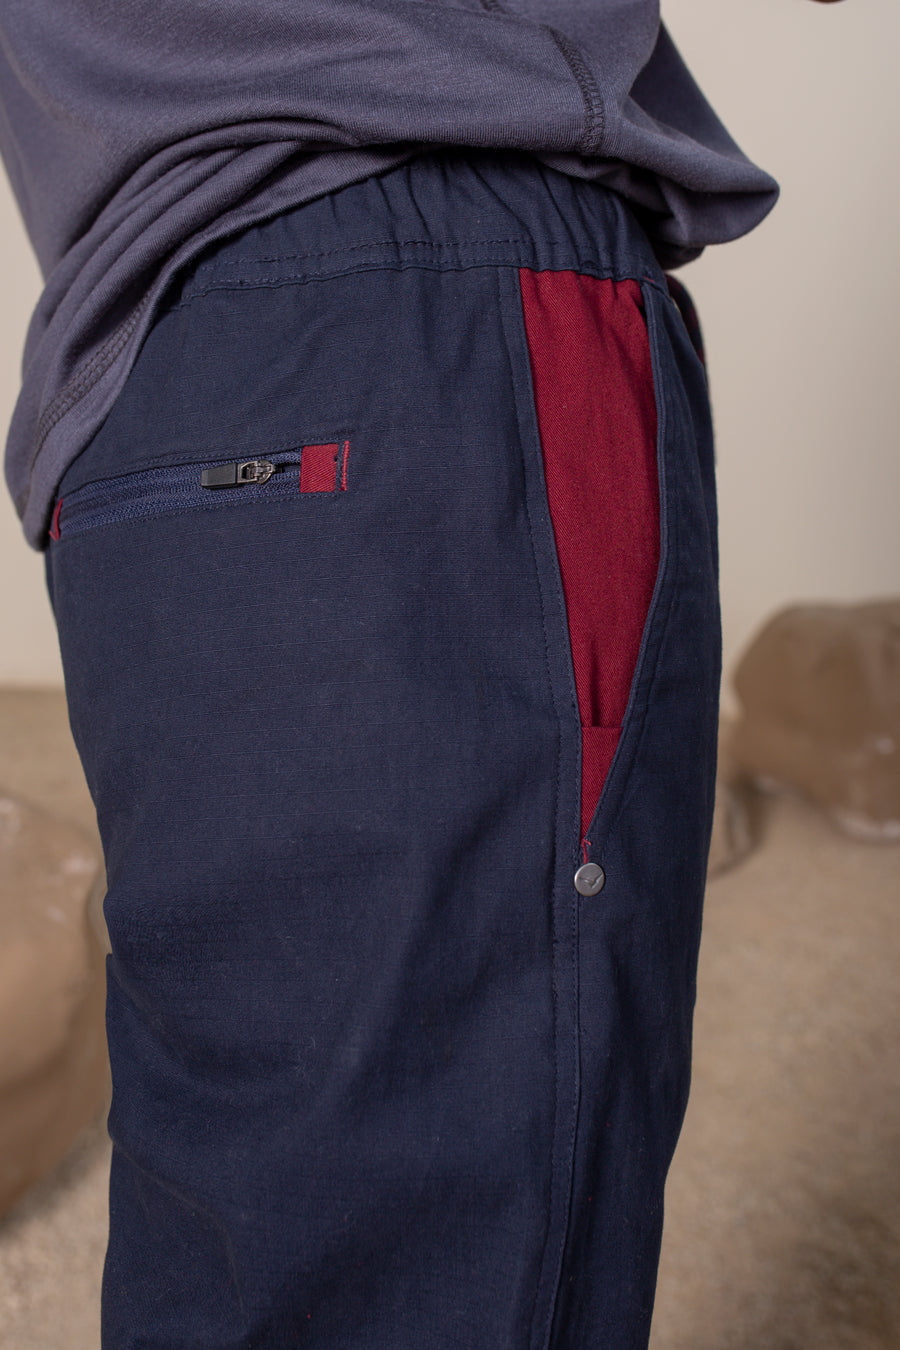 Men's Yosemite Rip Stop in Navy | VOLO Apparel | Made with a durable stretch rip stop, the Yosemite Rip Stop pant is our ultimate six pocket lifestyle pant. Featuring a 3 point gusset, snap button security pockets, 2 zipper pockets and the comfort of cotton ripstop, these are your go to adventure pants. Designed to take you from the summit, to the city.